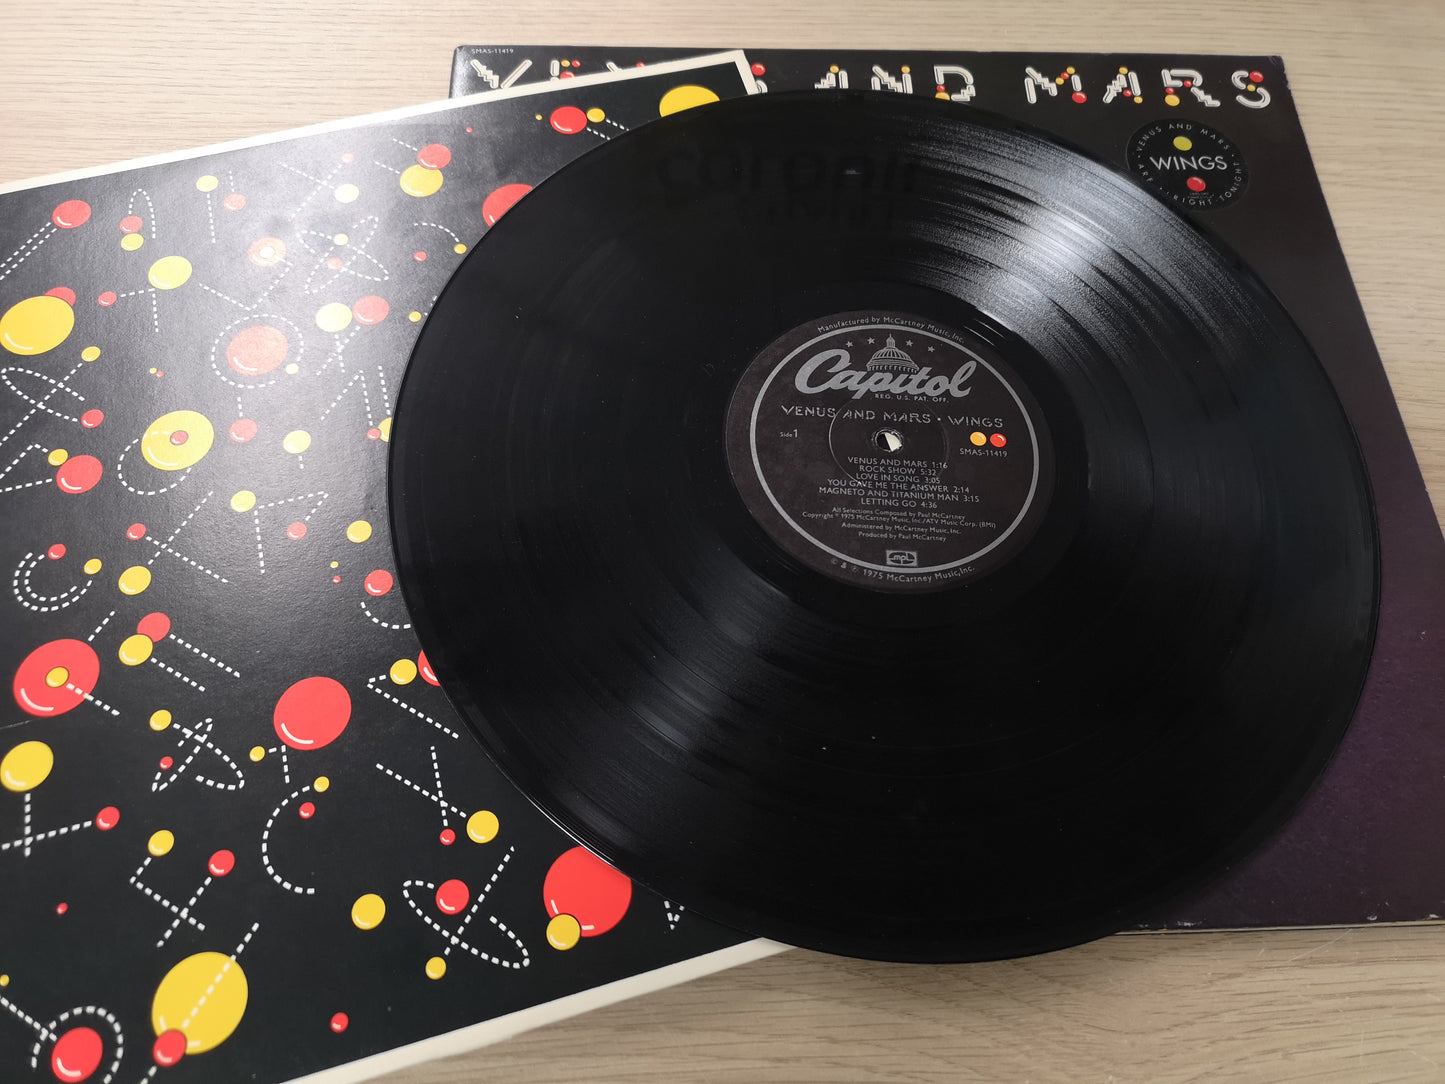 Wings "Venus and Mars" Orig US 1975 EX/EX (Inserts, Poster & Stickers)